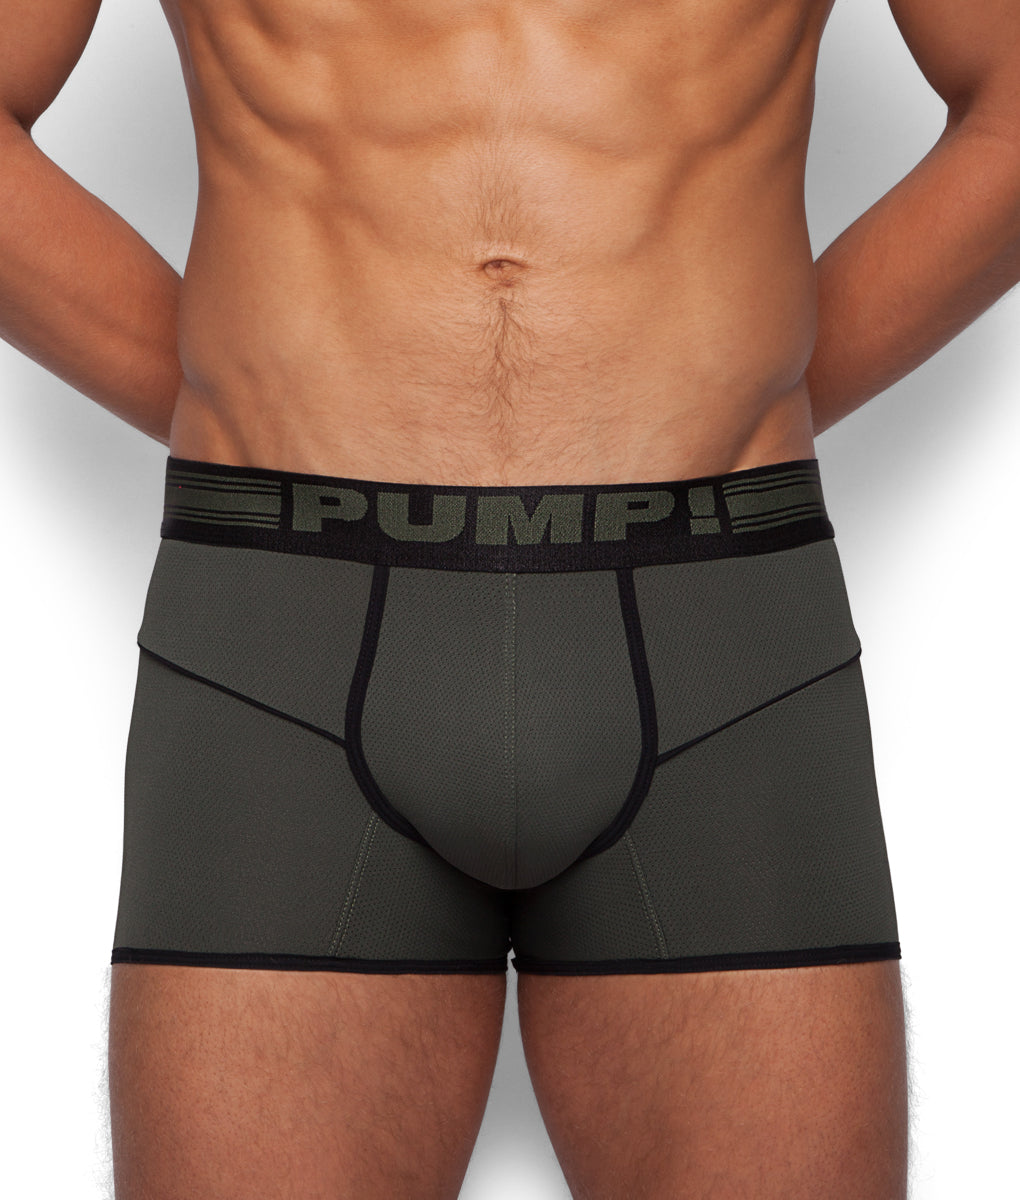 PUMP! Military Free-Fit Trunk